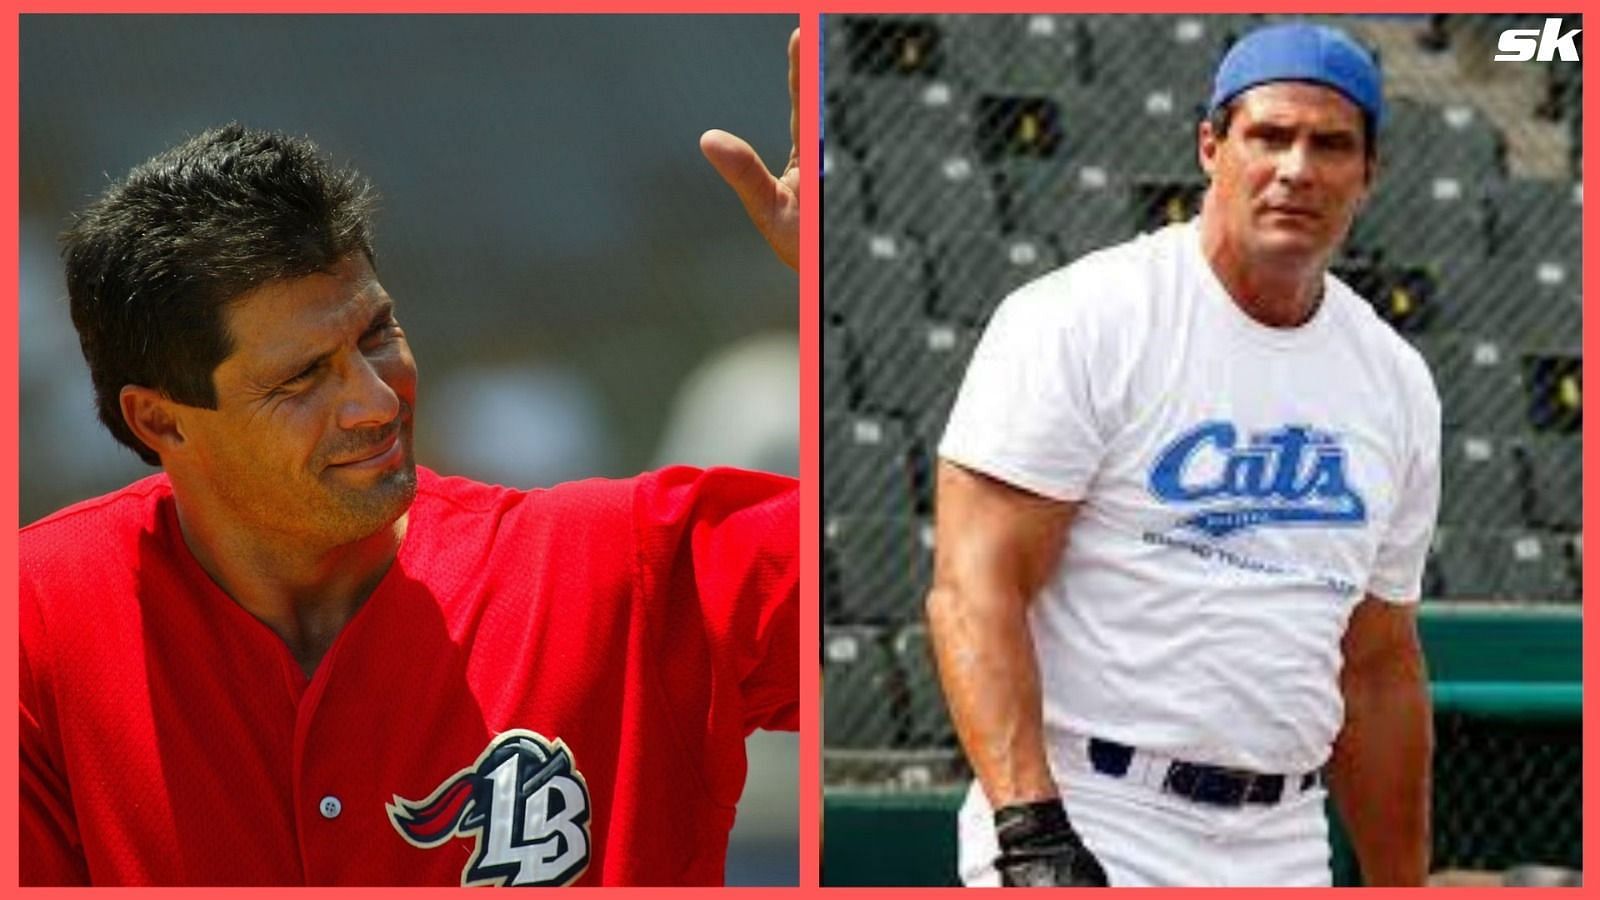 Jose Canseco, former baseball player